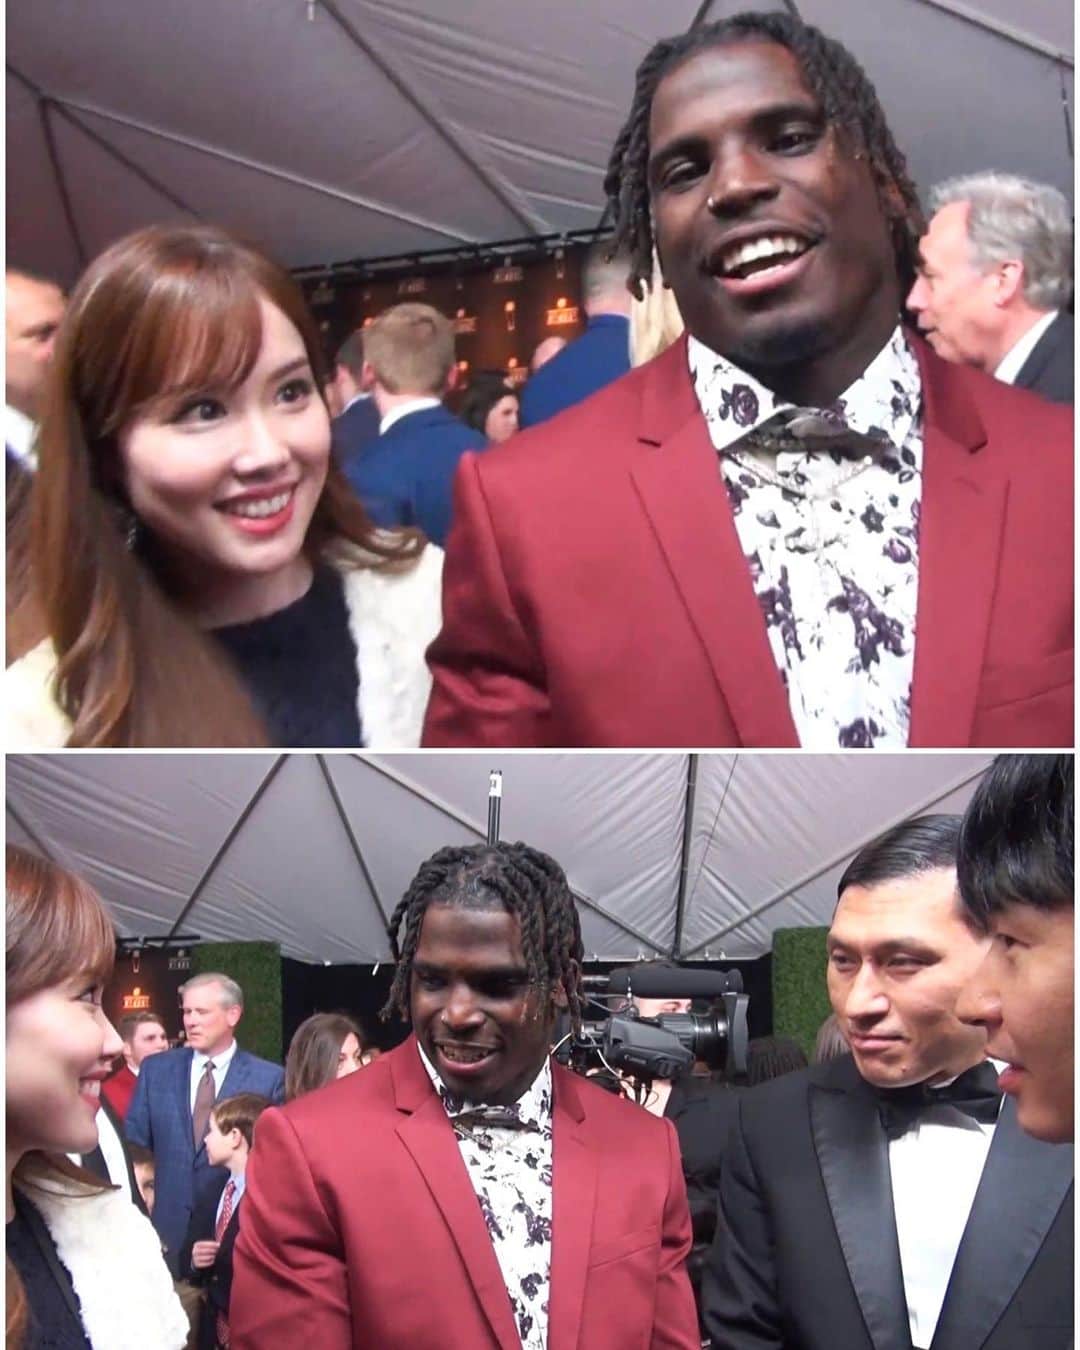 メロディー・モリタさんのインスタグラム写真 - (メロディー・モリタInstagram)「Reporting from Miami for SUPER BOWL and the 100th year anniversary of the @NFL!😆🏈✨ This year will be a tough match between the Chiefs who have made it to the Super Bowl for the first time in 50 years VS the 49ers with their seventh appearance. * Swipe for photos of this year's venue + interviews I conducted to Chiefs' star quarterback Patrick Mahomes and Tyreek Hill who have had a phenomonal season that led them to this stage + more players/legends! Mahomes' father was actually a professional baseball player in Japan as well which explains where his insane throws come from... but we'll have to keep our eyes peeled for what he'll show on the grand stage✨ * On the other hand, the 49ers' defense is highly skilled at slowing down the opponents' top weapons. Their head coach Kyle Shanahan will be making his Super Bowl debut and become the first ever father-son duo to make separate SB appearances. Will they be able to stop Mahomes and raise the Lombardi Trophy?! * I'm currently prepping and getting ready for the red carpet tonight with Oodori-san to interview all the star players. Wish us luck, and join in the fun for the final Sunday Night Football of the season!🔥 * 今年のSUPER BOWL開催地、マイアミに来ています！😄✨ 50年ぶりの出場となったChiefsと、7回目の出場となる49ersの対戦。 * 写真は会場、チーフスのスターウォーターバックのPatrick Mahomes選手、WRのTyreek Hill選手などへの以前のインタビュー風景です！ * ‪2018-2019シーズンのLeague MVPでもあるマホームズ選手ですが、プロ野球選手で日本でも活躍されたお父様譲りの肩で、このスーパーボウルでも目を疑うようなスーパープレーを魅せてくれるのでしょうか!? * 対する49ersはディフェンス力で、そのマホームズ選手たちの勢いあるプレーを止めることが出来るのかに注目！優秀コーチであるKyle Shanahan HCはNFL史上初、親子2代スーパーボウル制覇となるのかにも期待です👀‬ NFL倶楽部ではオードリーさんの後ろから、良い取材＆選手インタビューができるように頑張ります‼️💪 そして、スーパーボウル・サンデー、是非日テレでご覧ください✨ #NFL #NFLclub #SuperBowl #superbowl2020 #superbowlliv #Chiefs #49ers #選手インタビュー」2月1日 23時13分 - melodeemorita